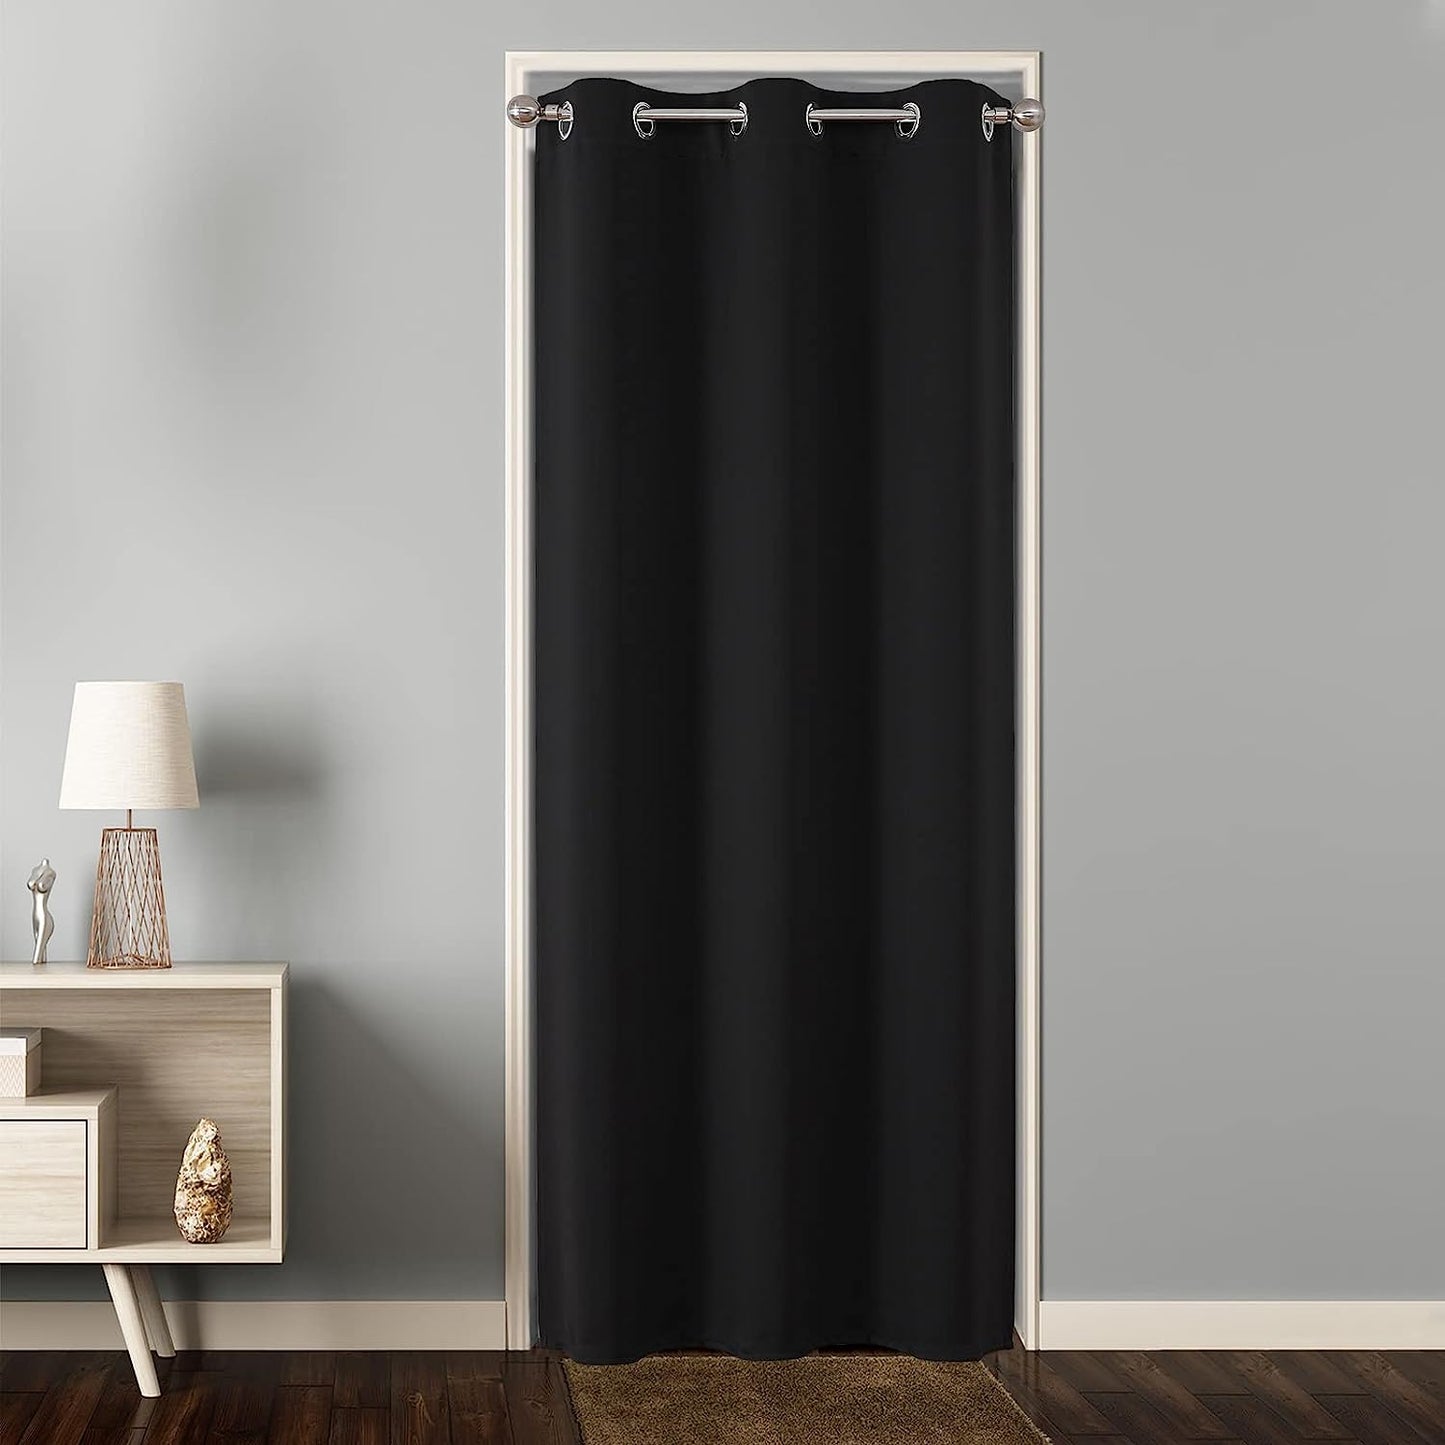 Joydeco Curtains for Sliding Glass Doors, Blackout Curtains 100 X 84 Inches, Extra Wide Curtains for Patio Sliding Door Living Room, Room Divider Curtains  Joydeco Black 52W X 78L Inch X 1 Panel 